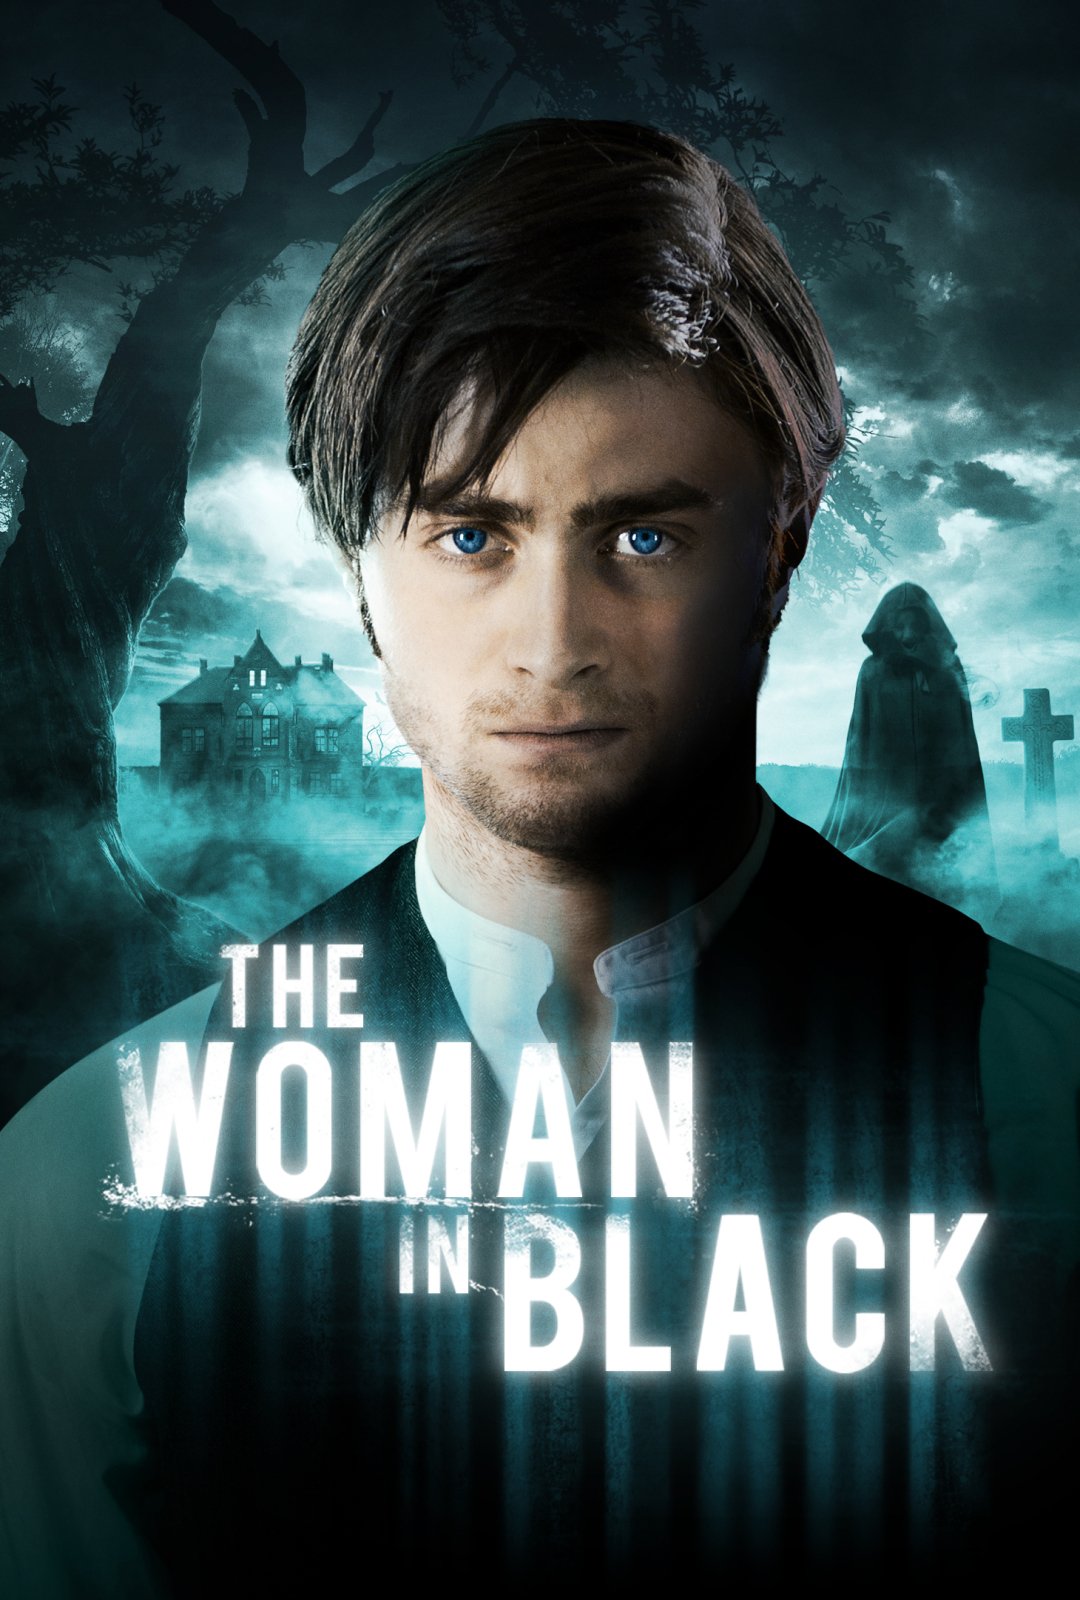 The Woman in Black - movie: watch streaming online